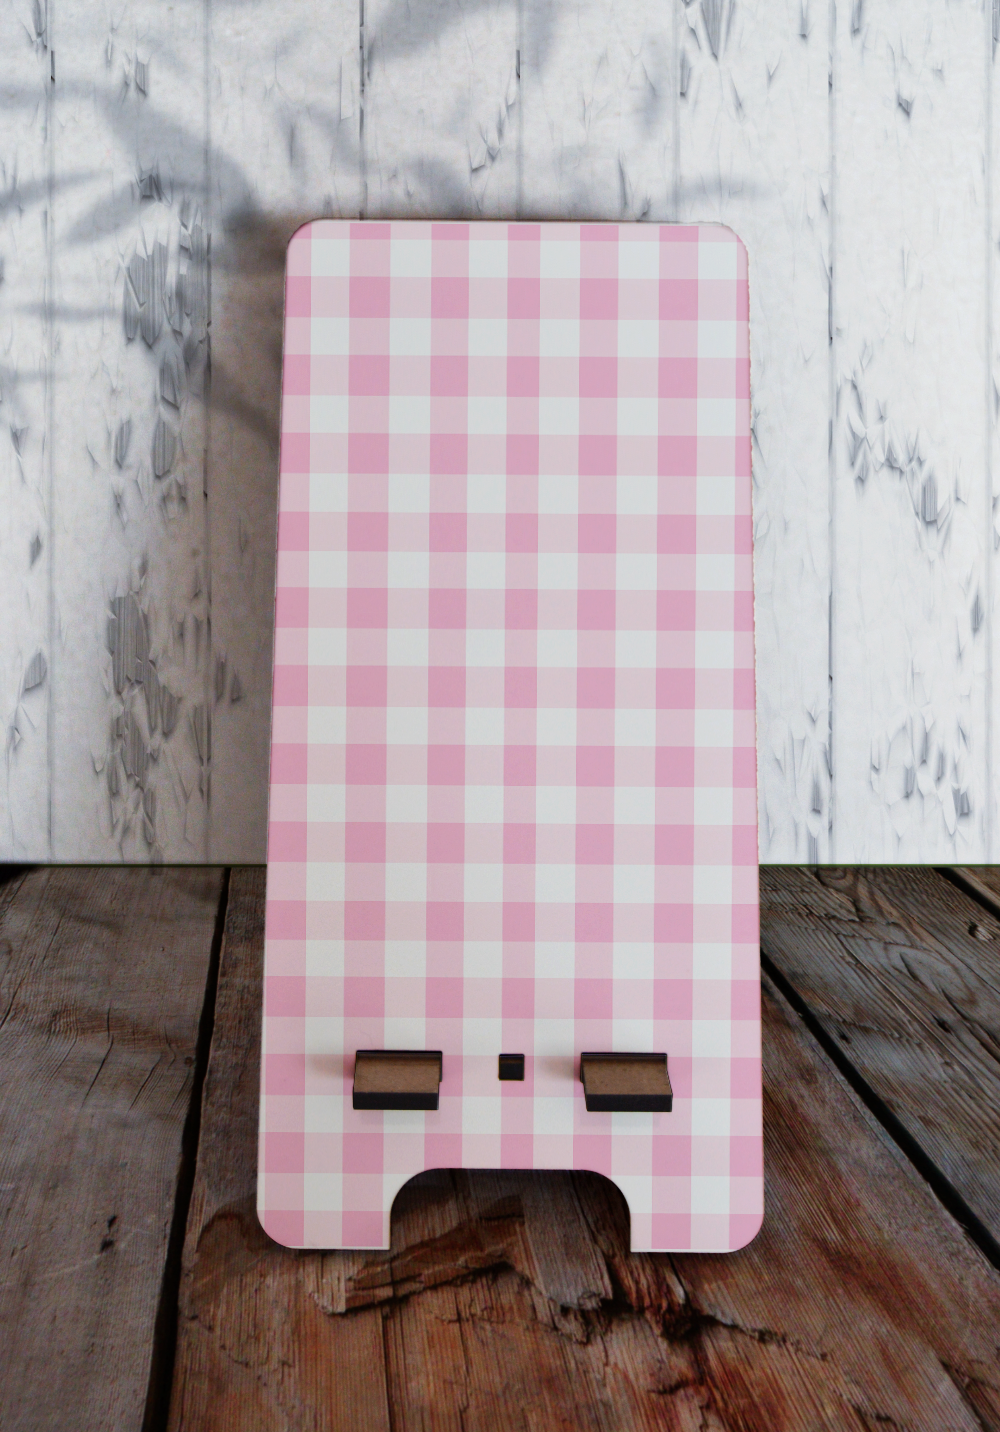 Phone stand (small) - Pink Checkered